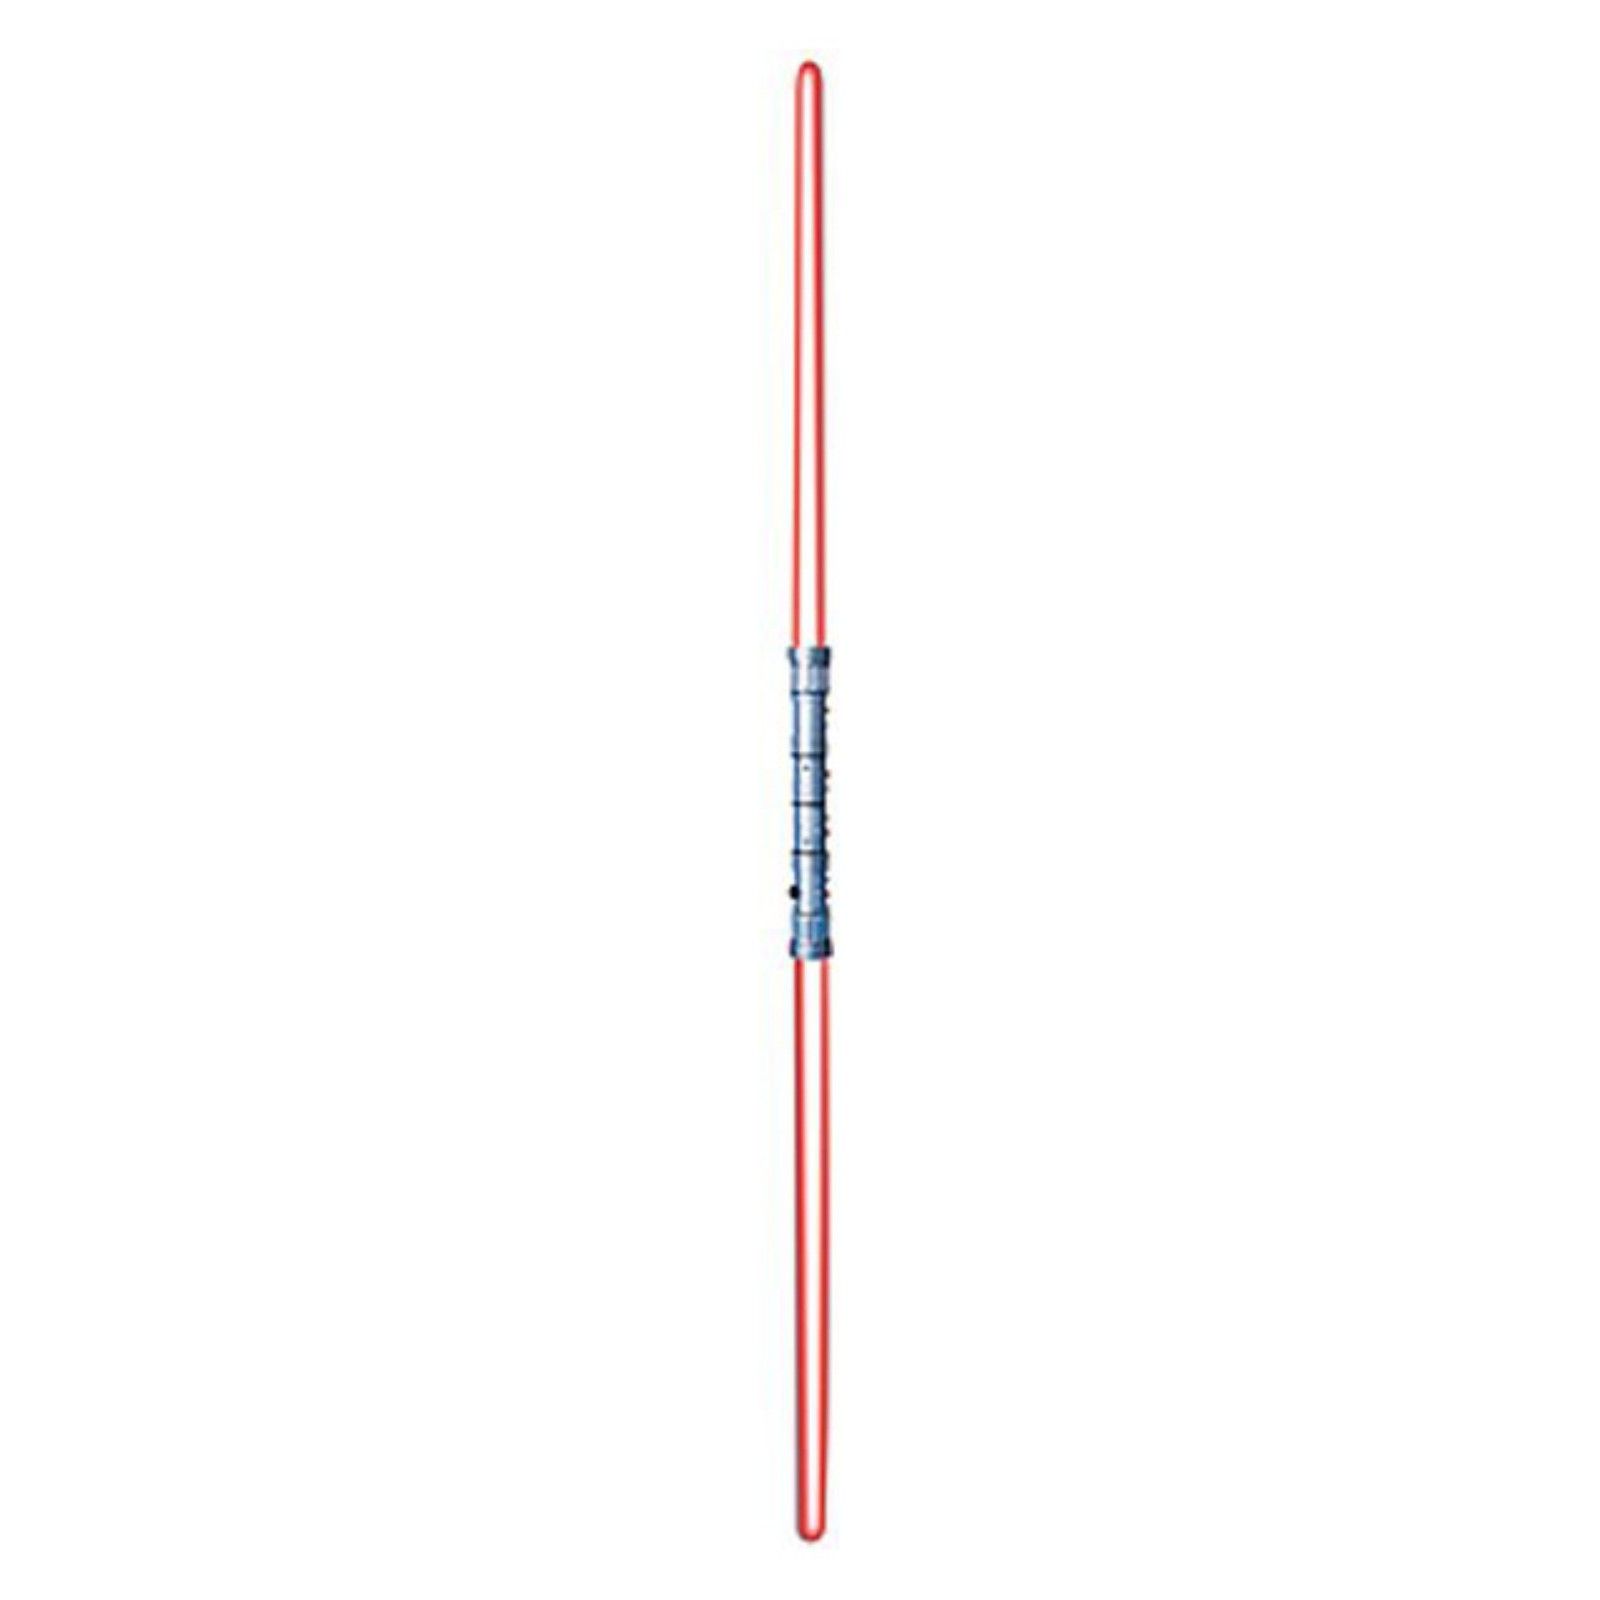 Star Wars Darth Maul Lightsaber Double Bladed